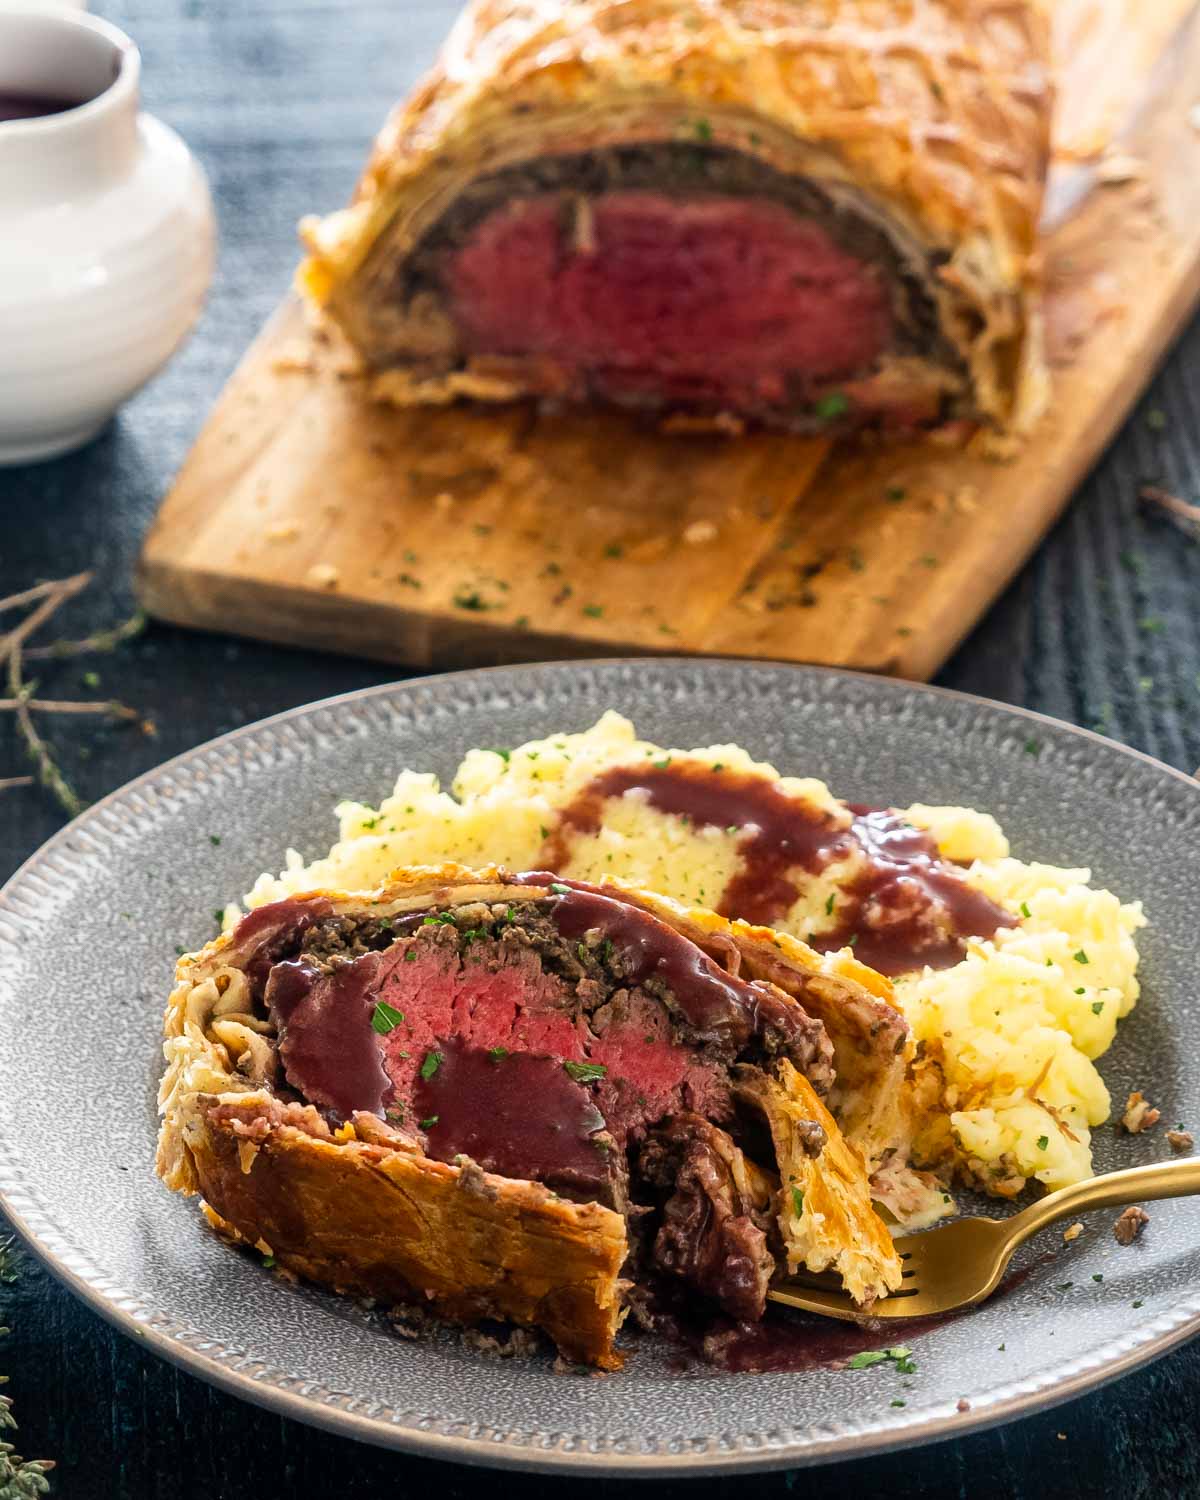 a slice of beef wellington with mashed potatoes and red wine sauce.